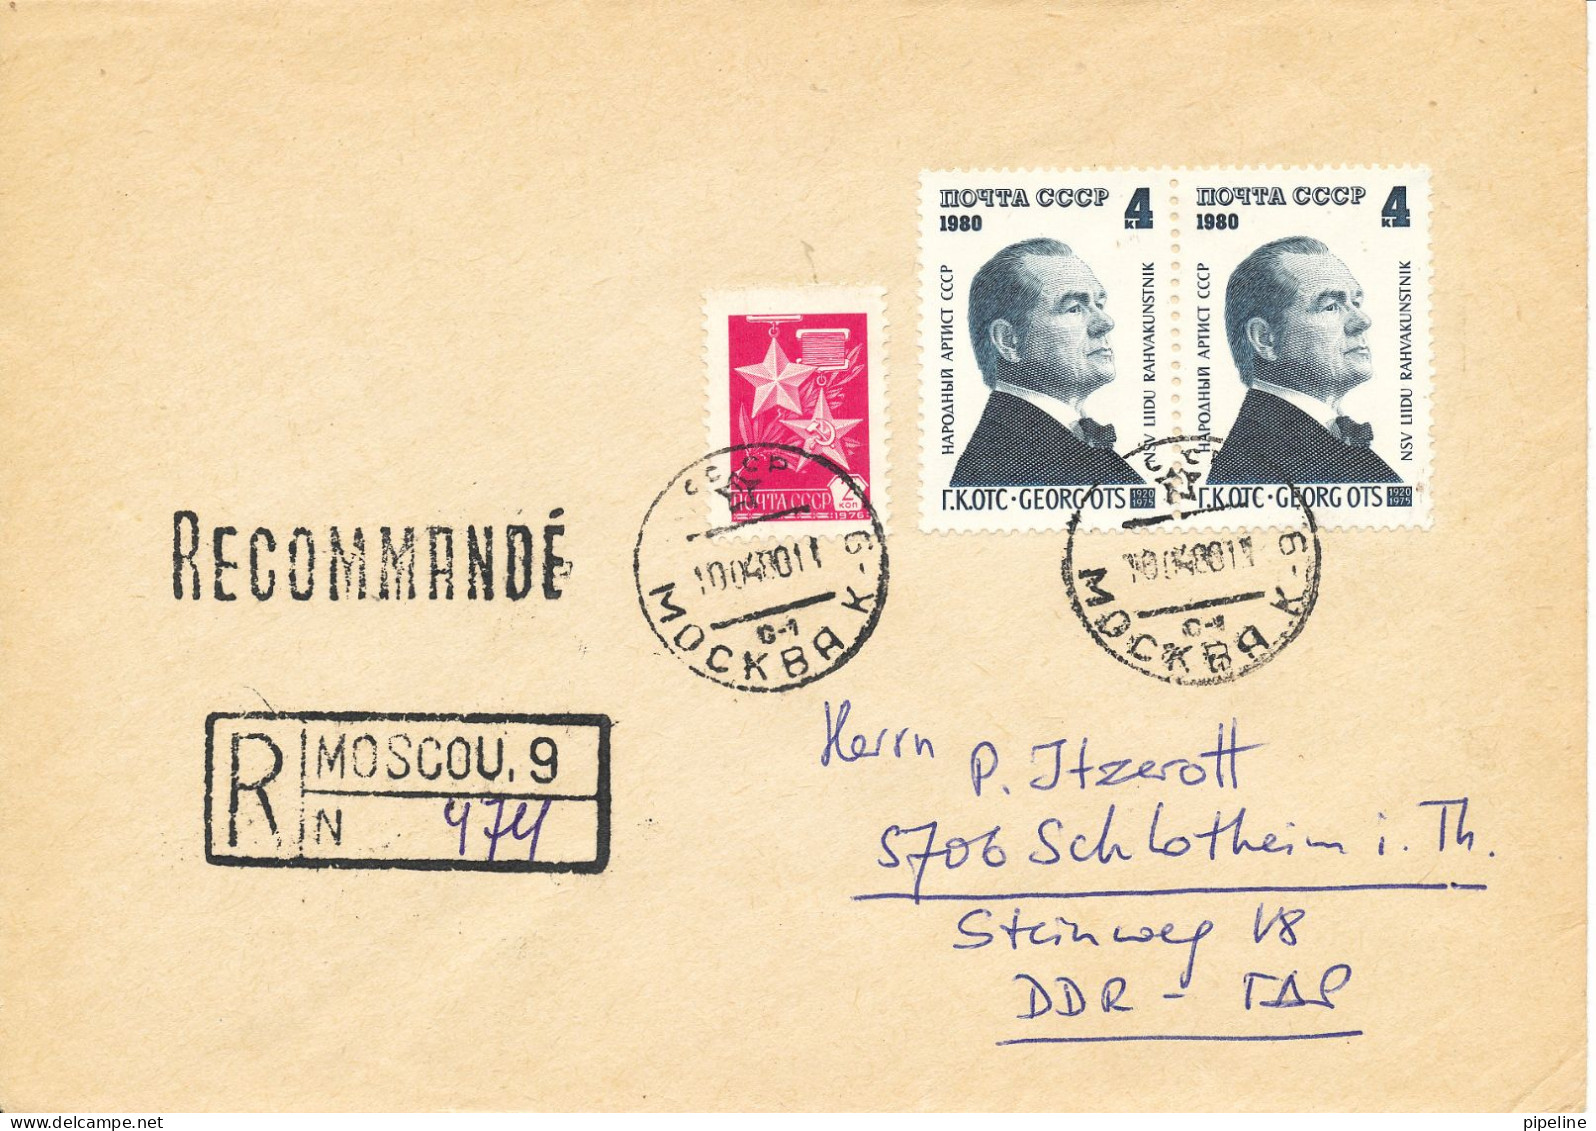 USSR Registered Cover Sent To Germany DDR 10-4-1980 Topic Stamps - Brieven En Documenten